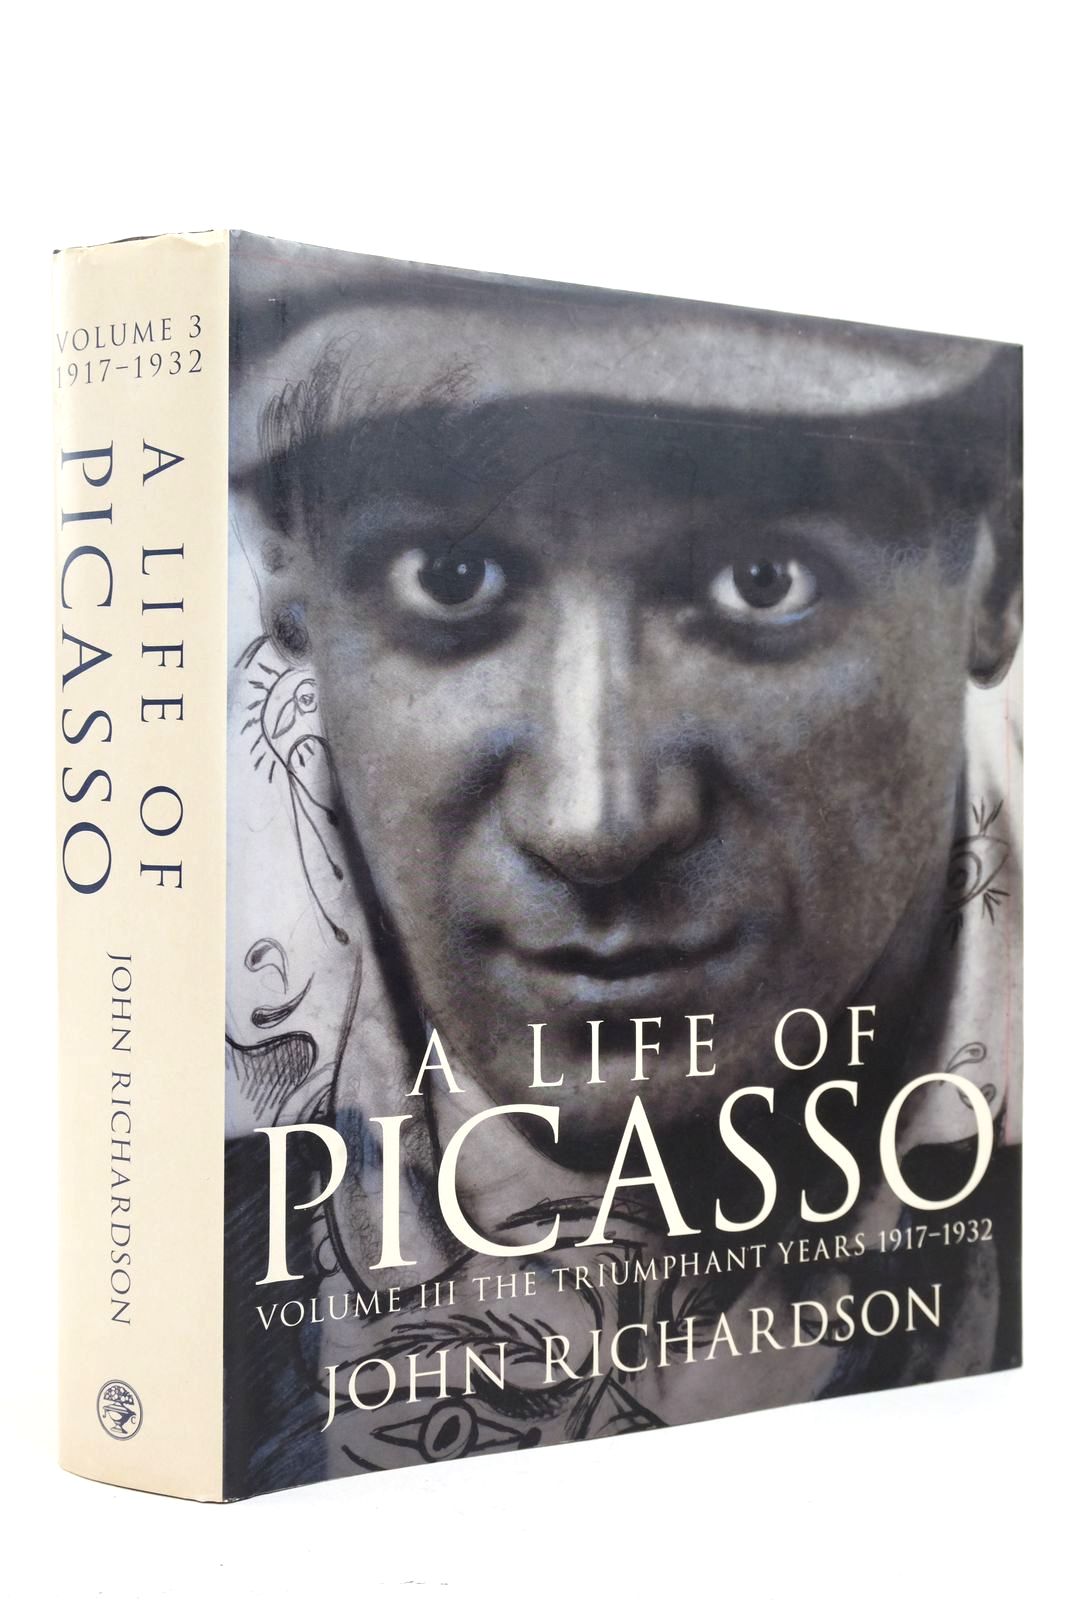 Photo of A LIFE OF PICASSO VOL III THE TRIUMPHANT YEARS 1917-1932 written by Richardson, John published by Jonathan Cape (STOCK CODE: 2140742)  for sale by Stella & Rose's Books